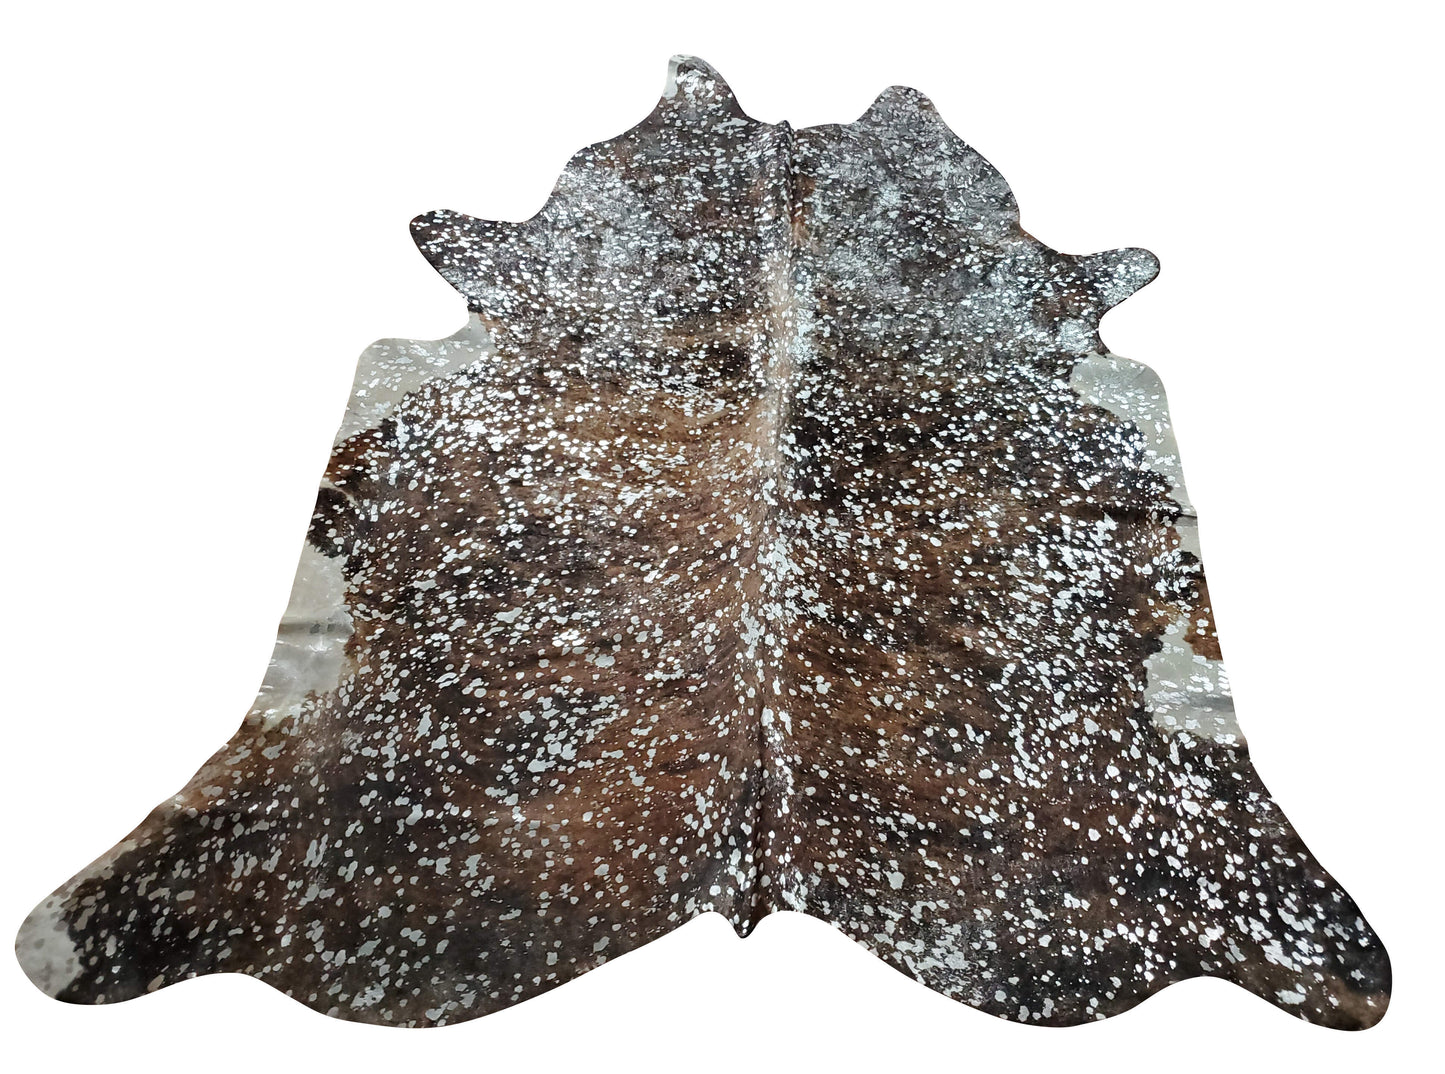 This attractive metallic cowhide rug is stunningly beautiful, and it even looks more beautiful in person; you'll be captivated by the intricate silver design. It's very soft and cozy, too plus free shipping all over the USA